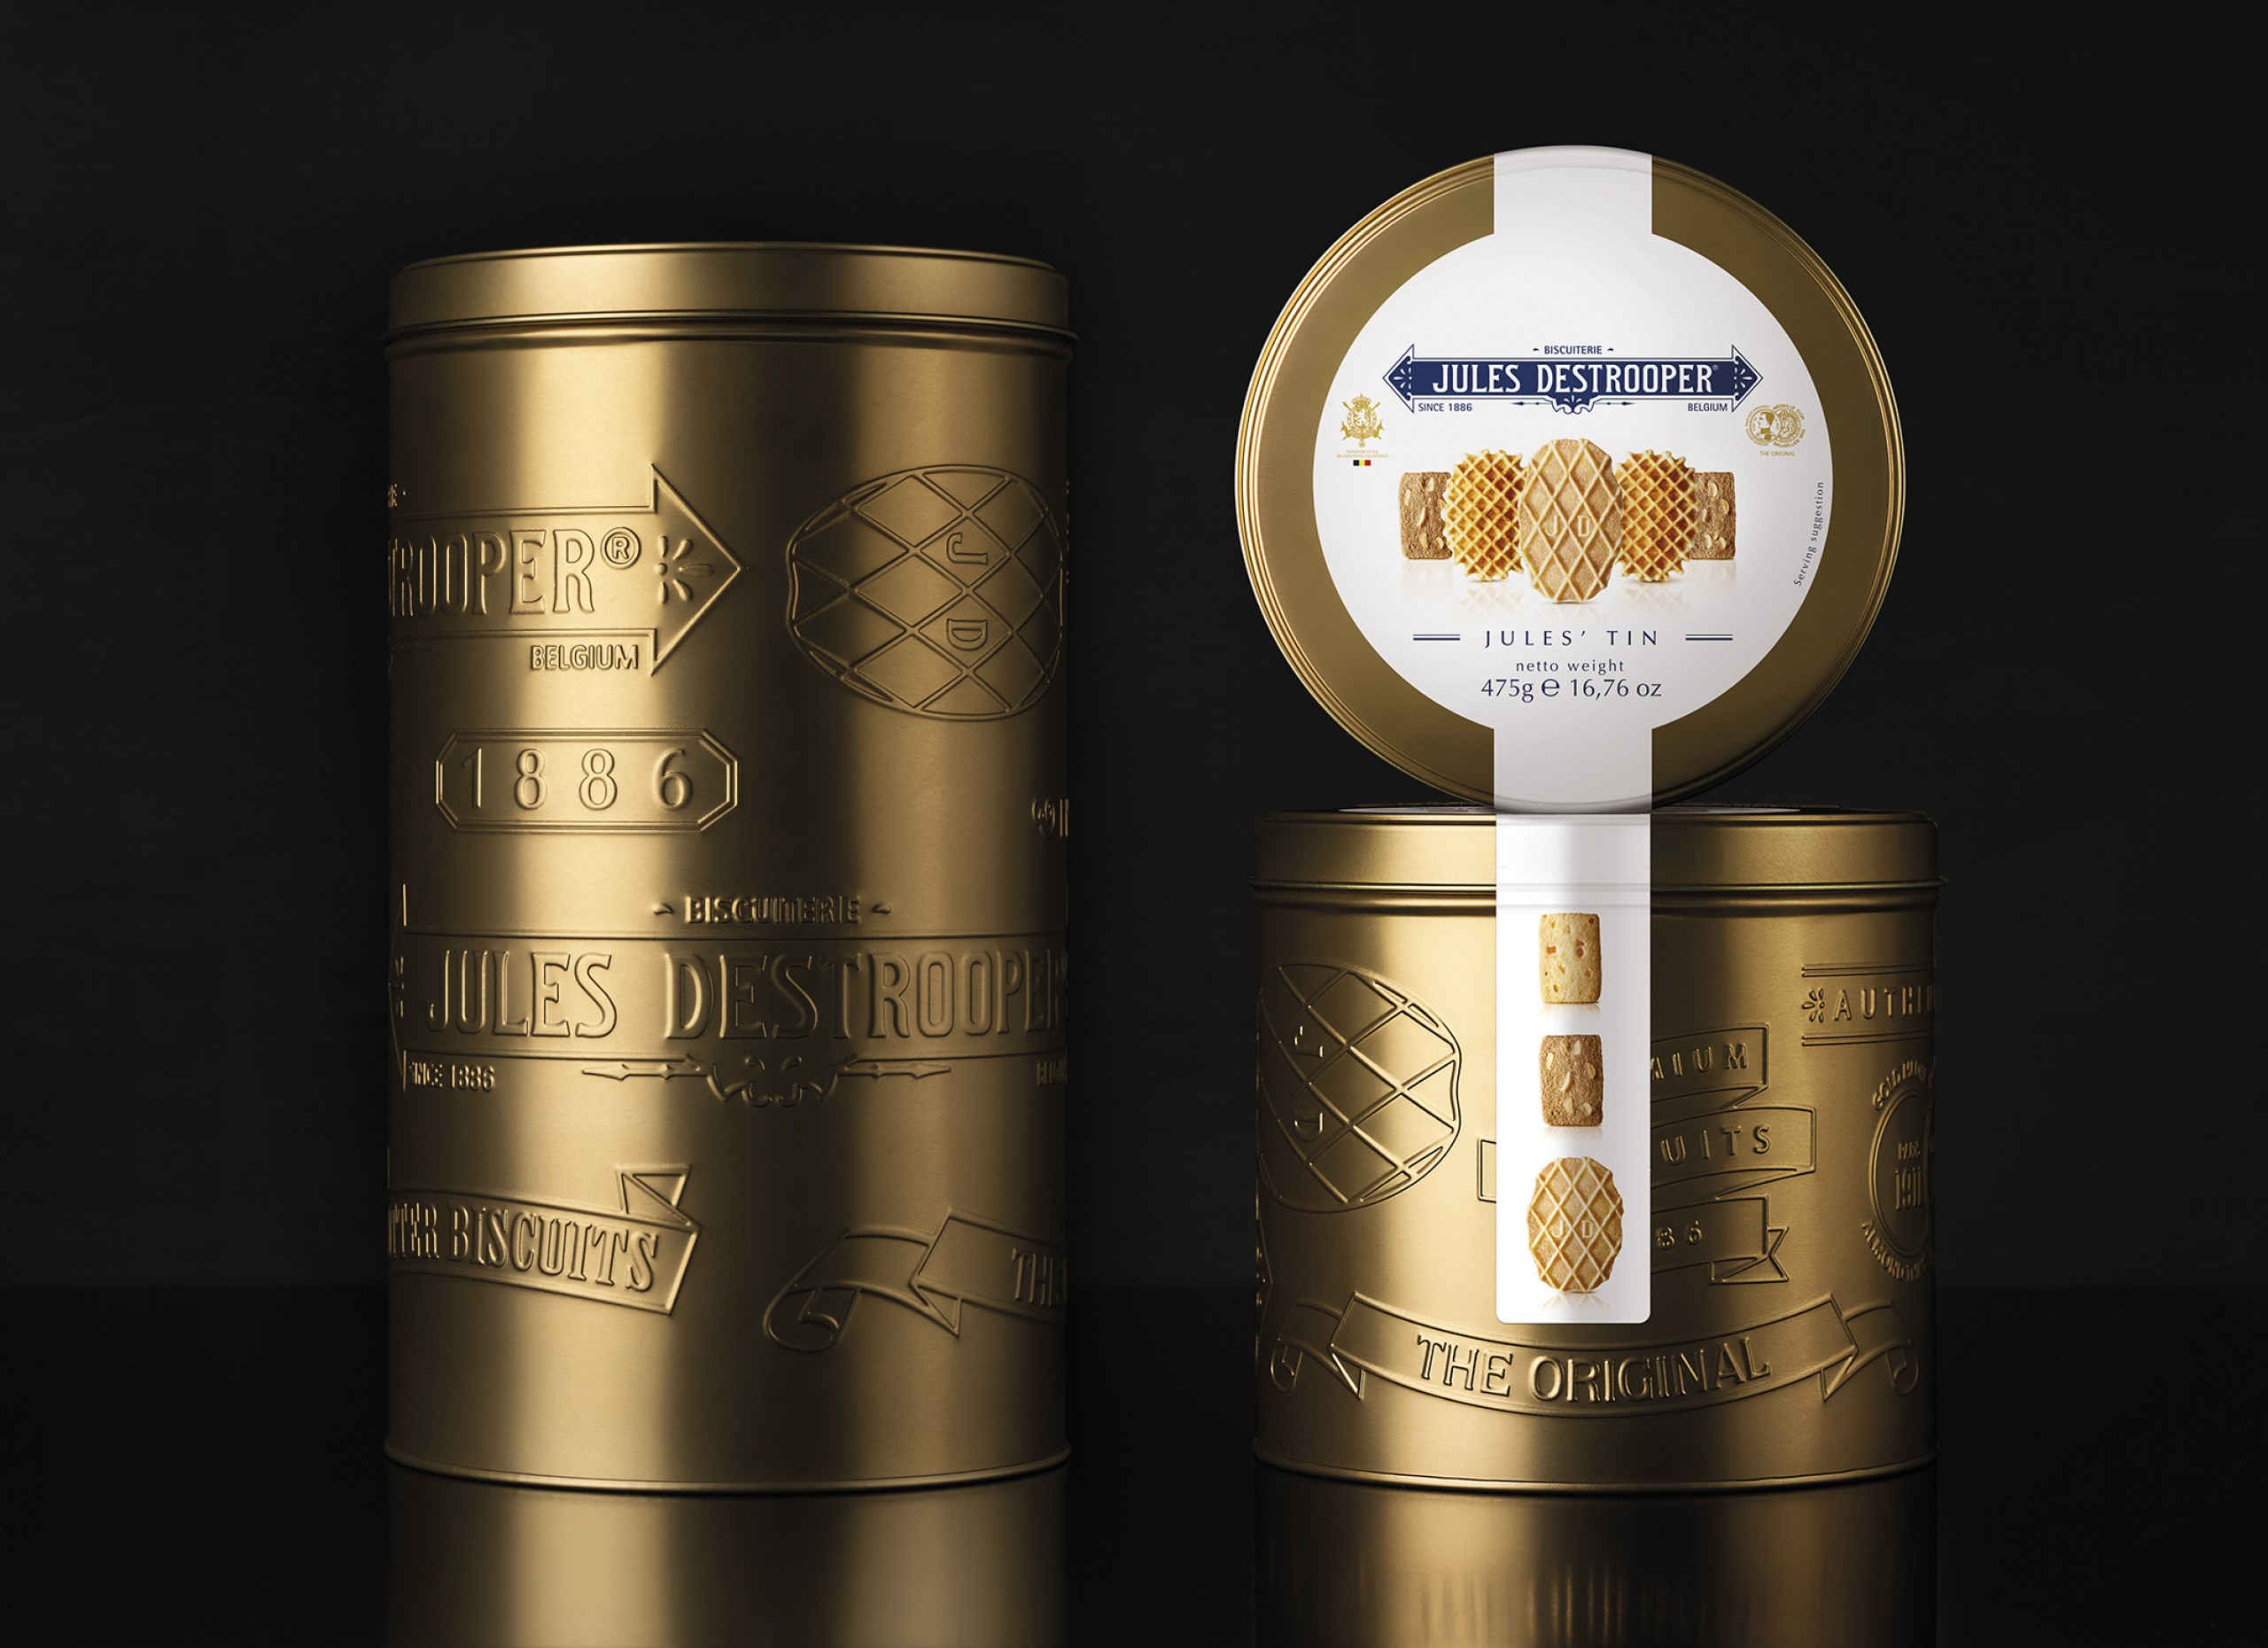 Quatre Mains package design - Package design Luxury Packaging, Jules destroopere, Tin can, Belgium, biscuits